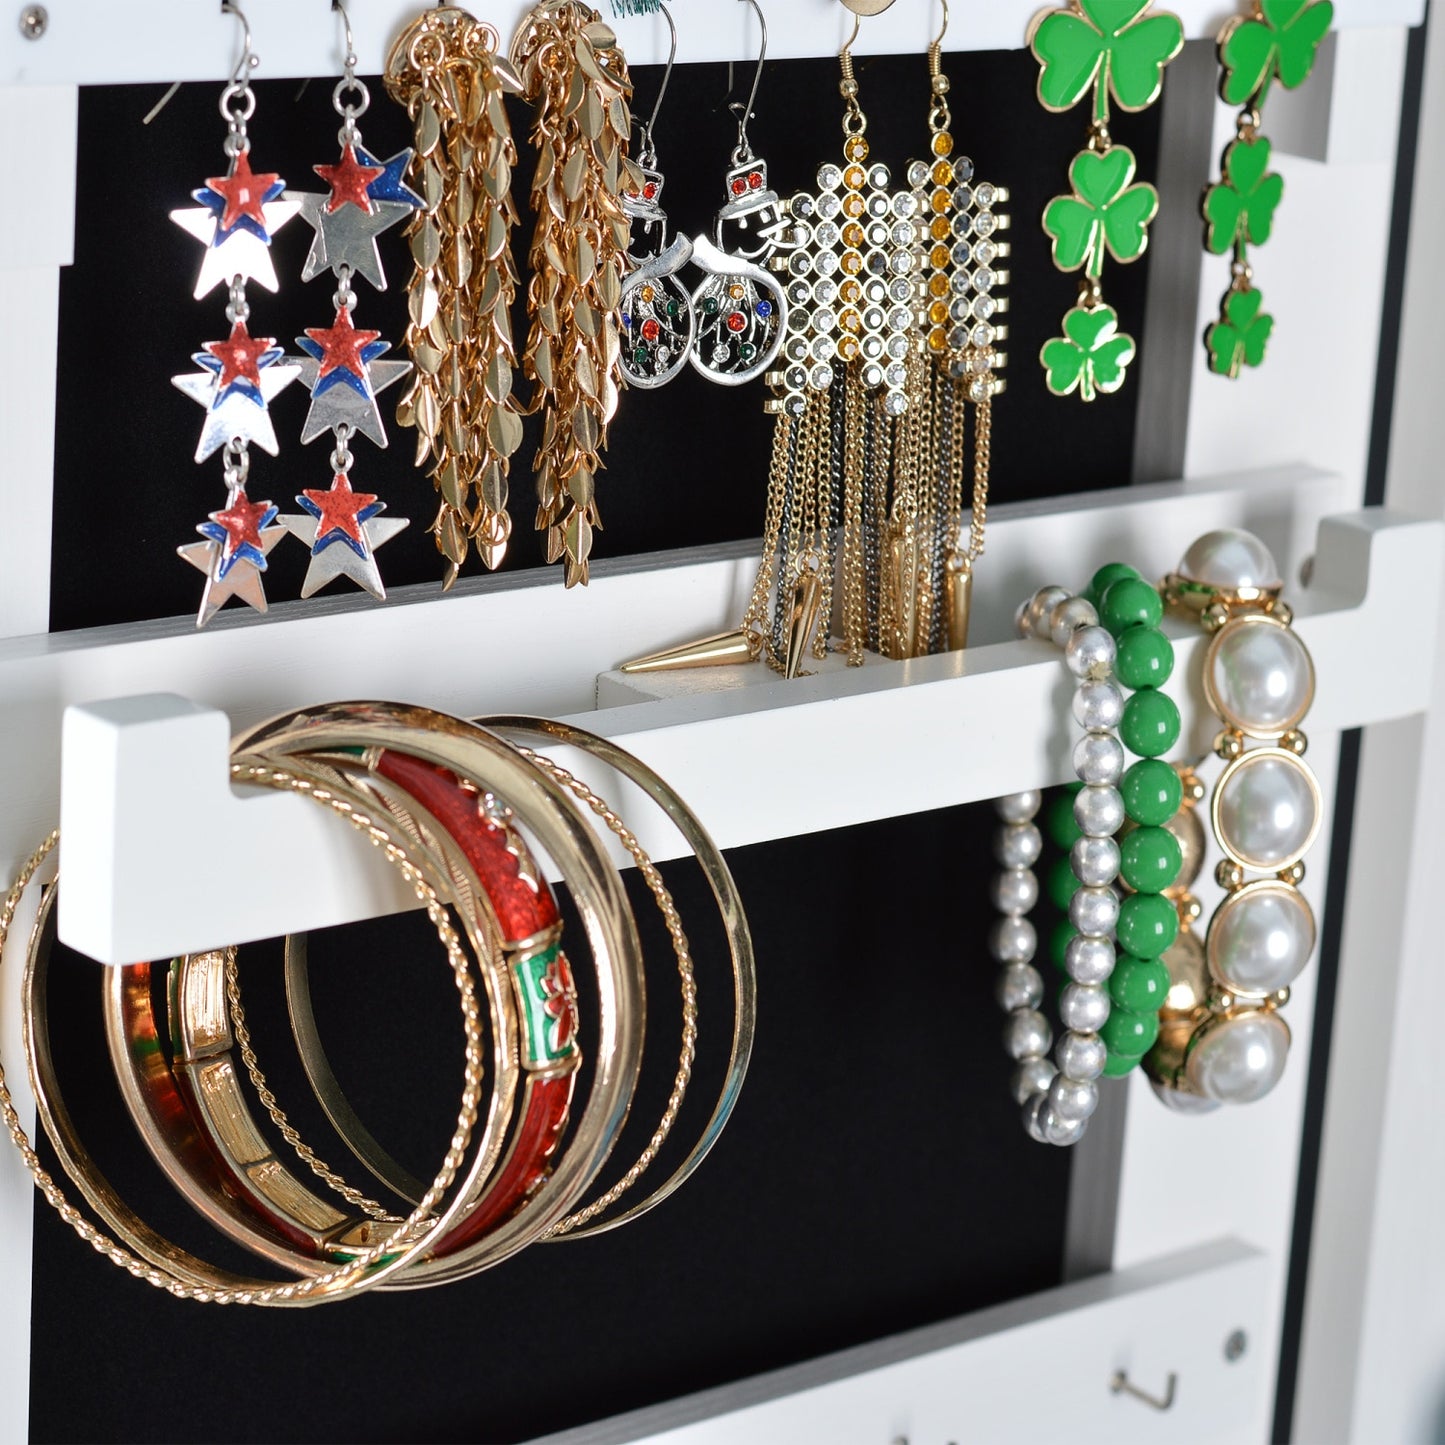 Full Mirror Fashion Jewelry Storage Cabinet With Led Light. Can also Be Hung On The Door Or Wall